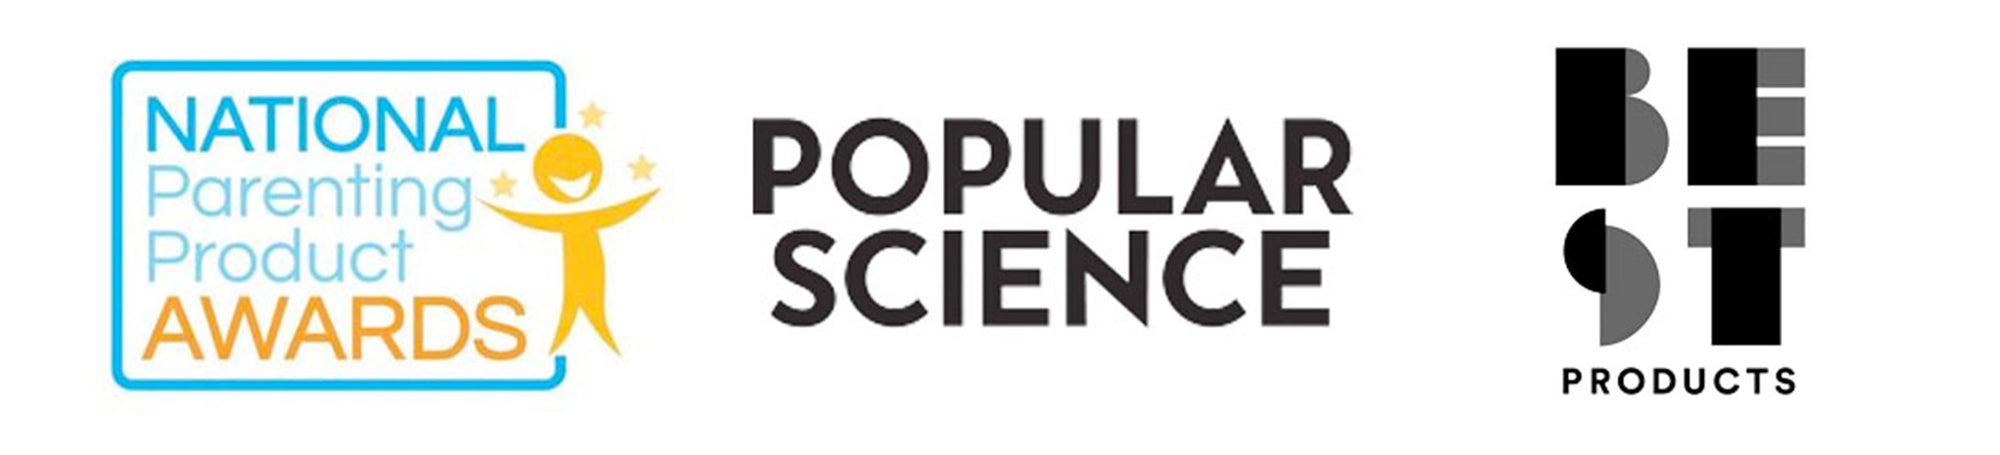 Logos - NPPA, Popular Science, Best Products